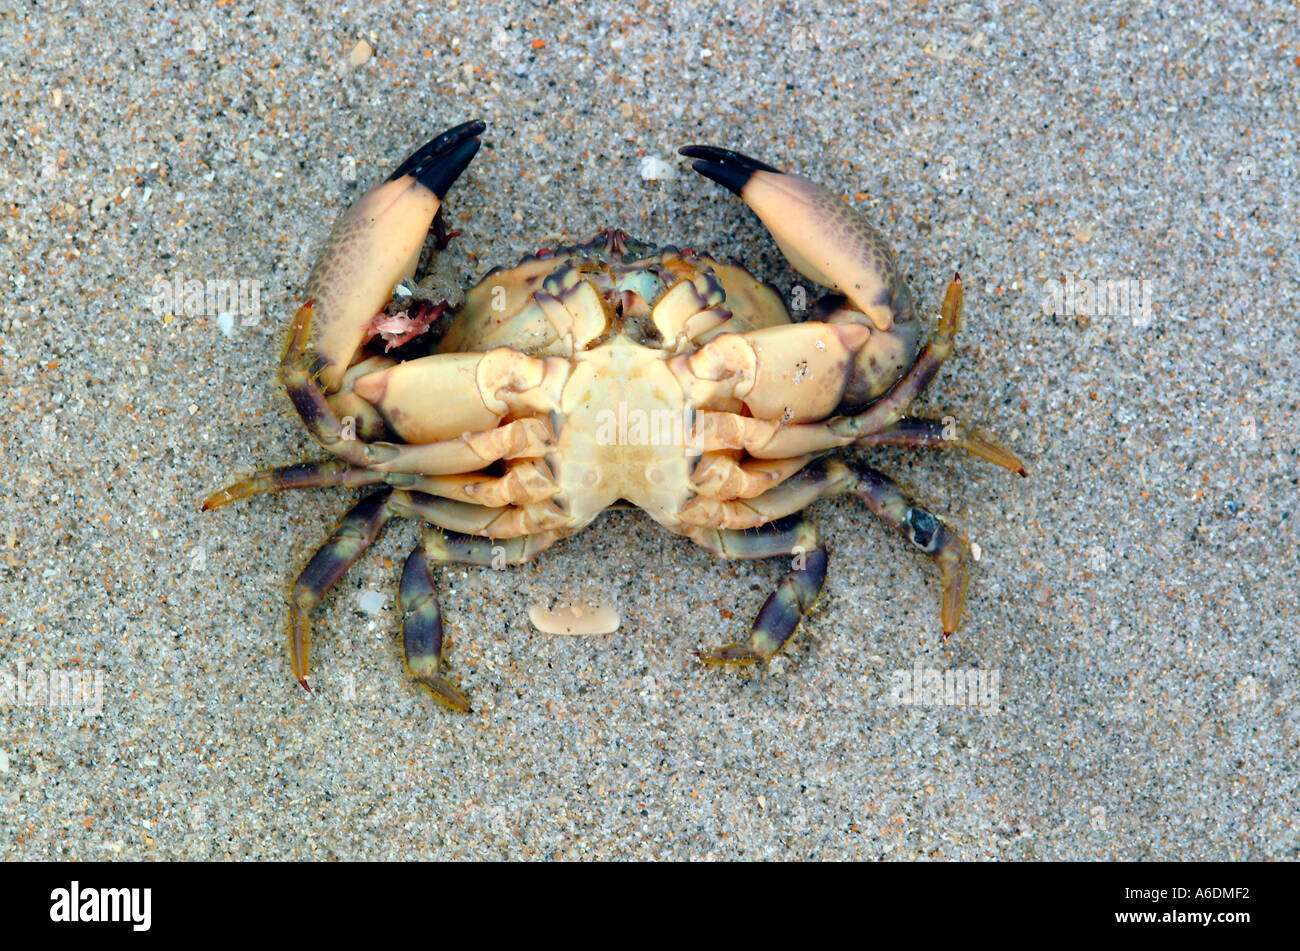 underside of dead washed up on beach stone crab Menippe mercenaria Stock Photo